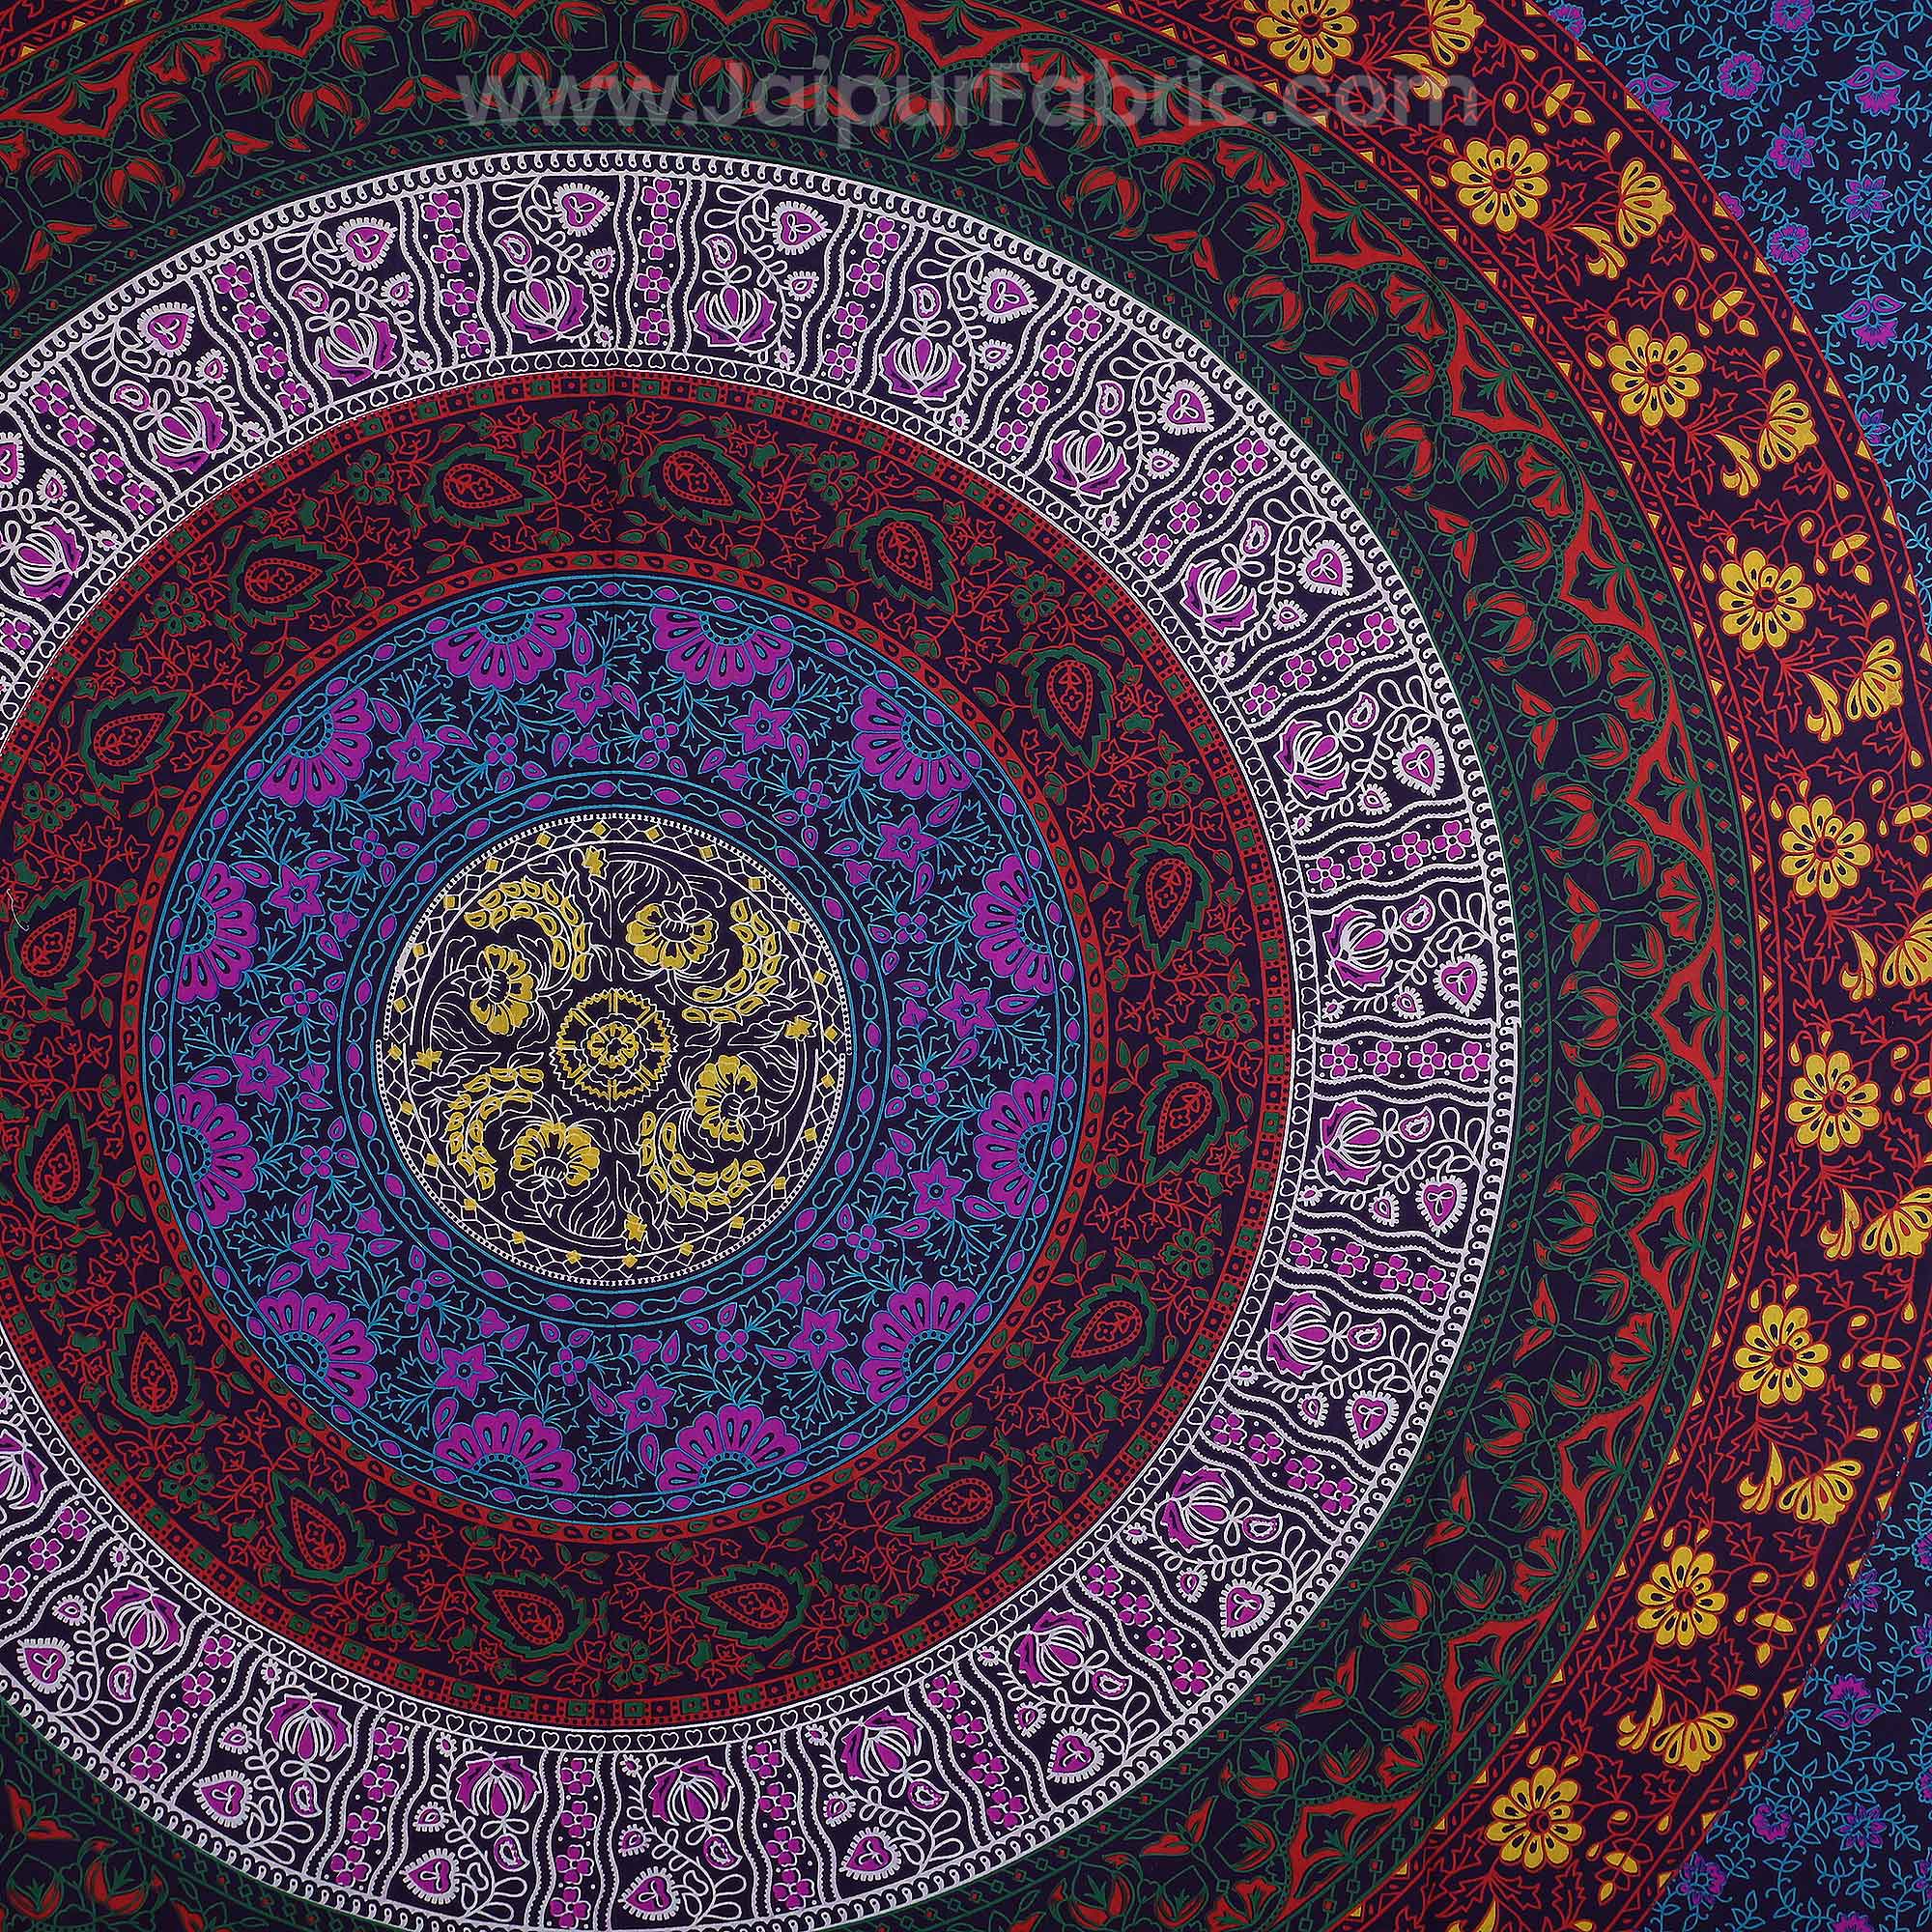 Purple Double Bedsheet Indian Mandala Tapestry Hippy Tapestries Hippie Beach Throw